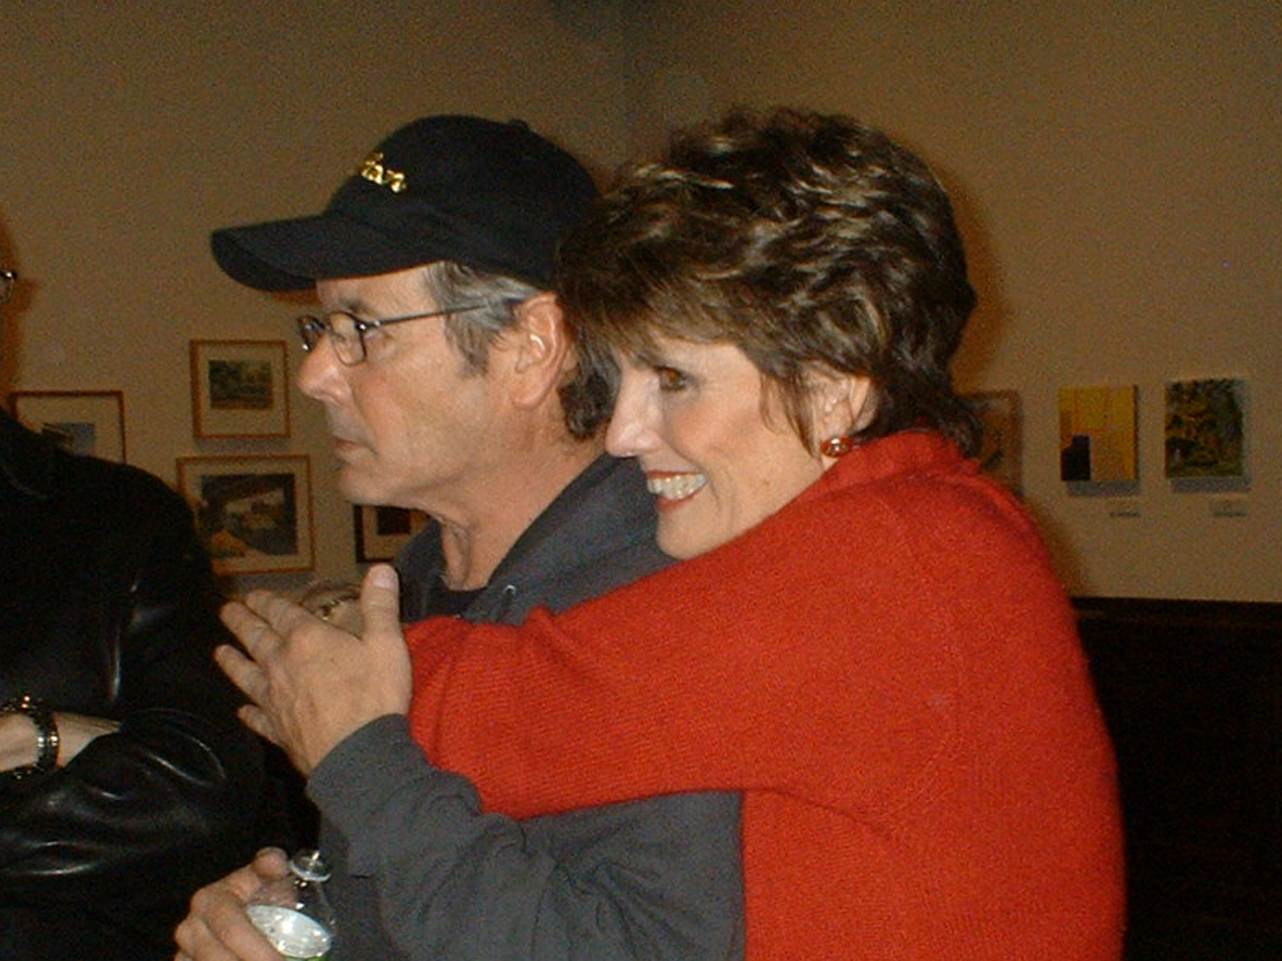 Desi and his sister, Lucie Arnaz, after performing a tribute to their father's music (BABALU) at the 92nd Street Y in New York (January 2010)